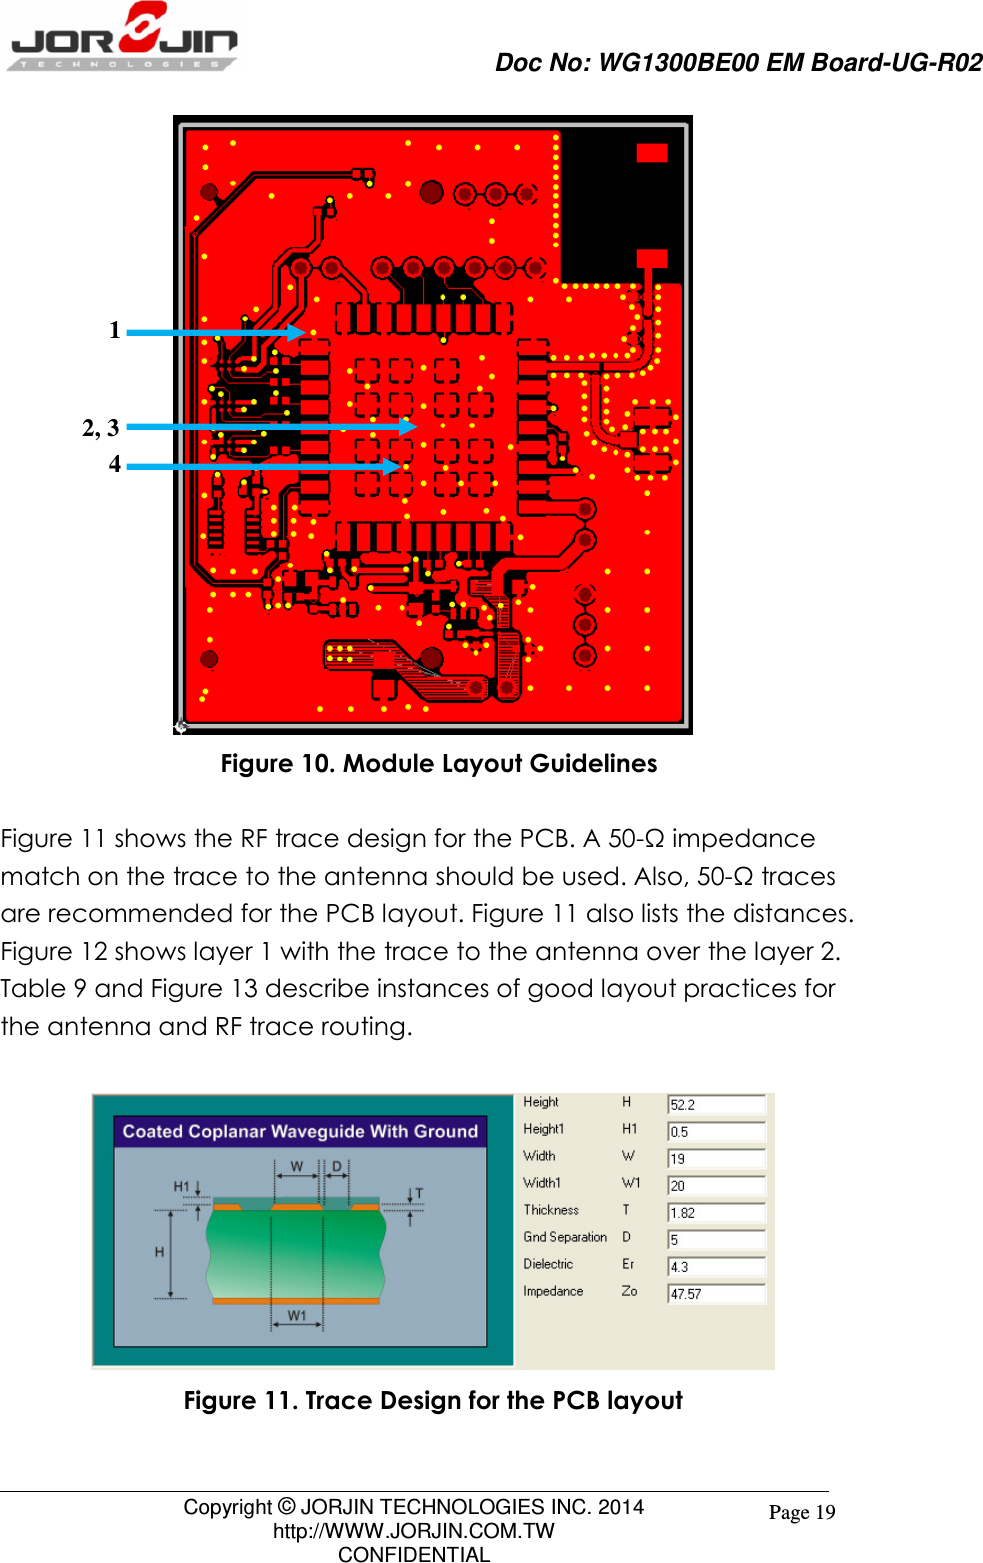                     Doc No: WG1300BE00 EM Board-UG-R02                                                                                        Copyright © JORJIN TECHNOLOGIES INC. 2014 http://WWW.JORJIN.COM.TW CONFIDENTIAL Page 19  Figure 10. Module Layout Guidelines  Figure 11 shows the RF trace design for the PCB. A 50-Ω impedance match on the trace to the antenna should be used. Also, 50-Ω traces are recommended for the PCB layout. Figure 11 also lists the distances. Figure 12 shows layer 1 with the trace to the antenna over the layer 2. Table 9 and Figure 13 describe instances of good layout practices for the antenna and RF trace routing.     Figure 11. Trace Design for the PCB layout  1 2, 3 4 